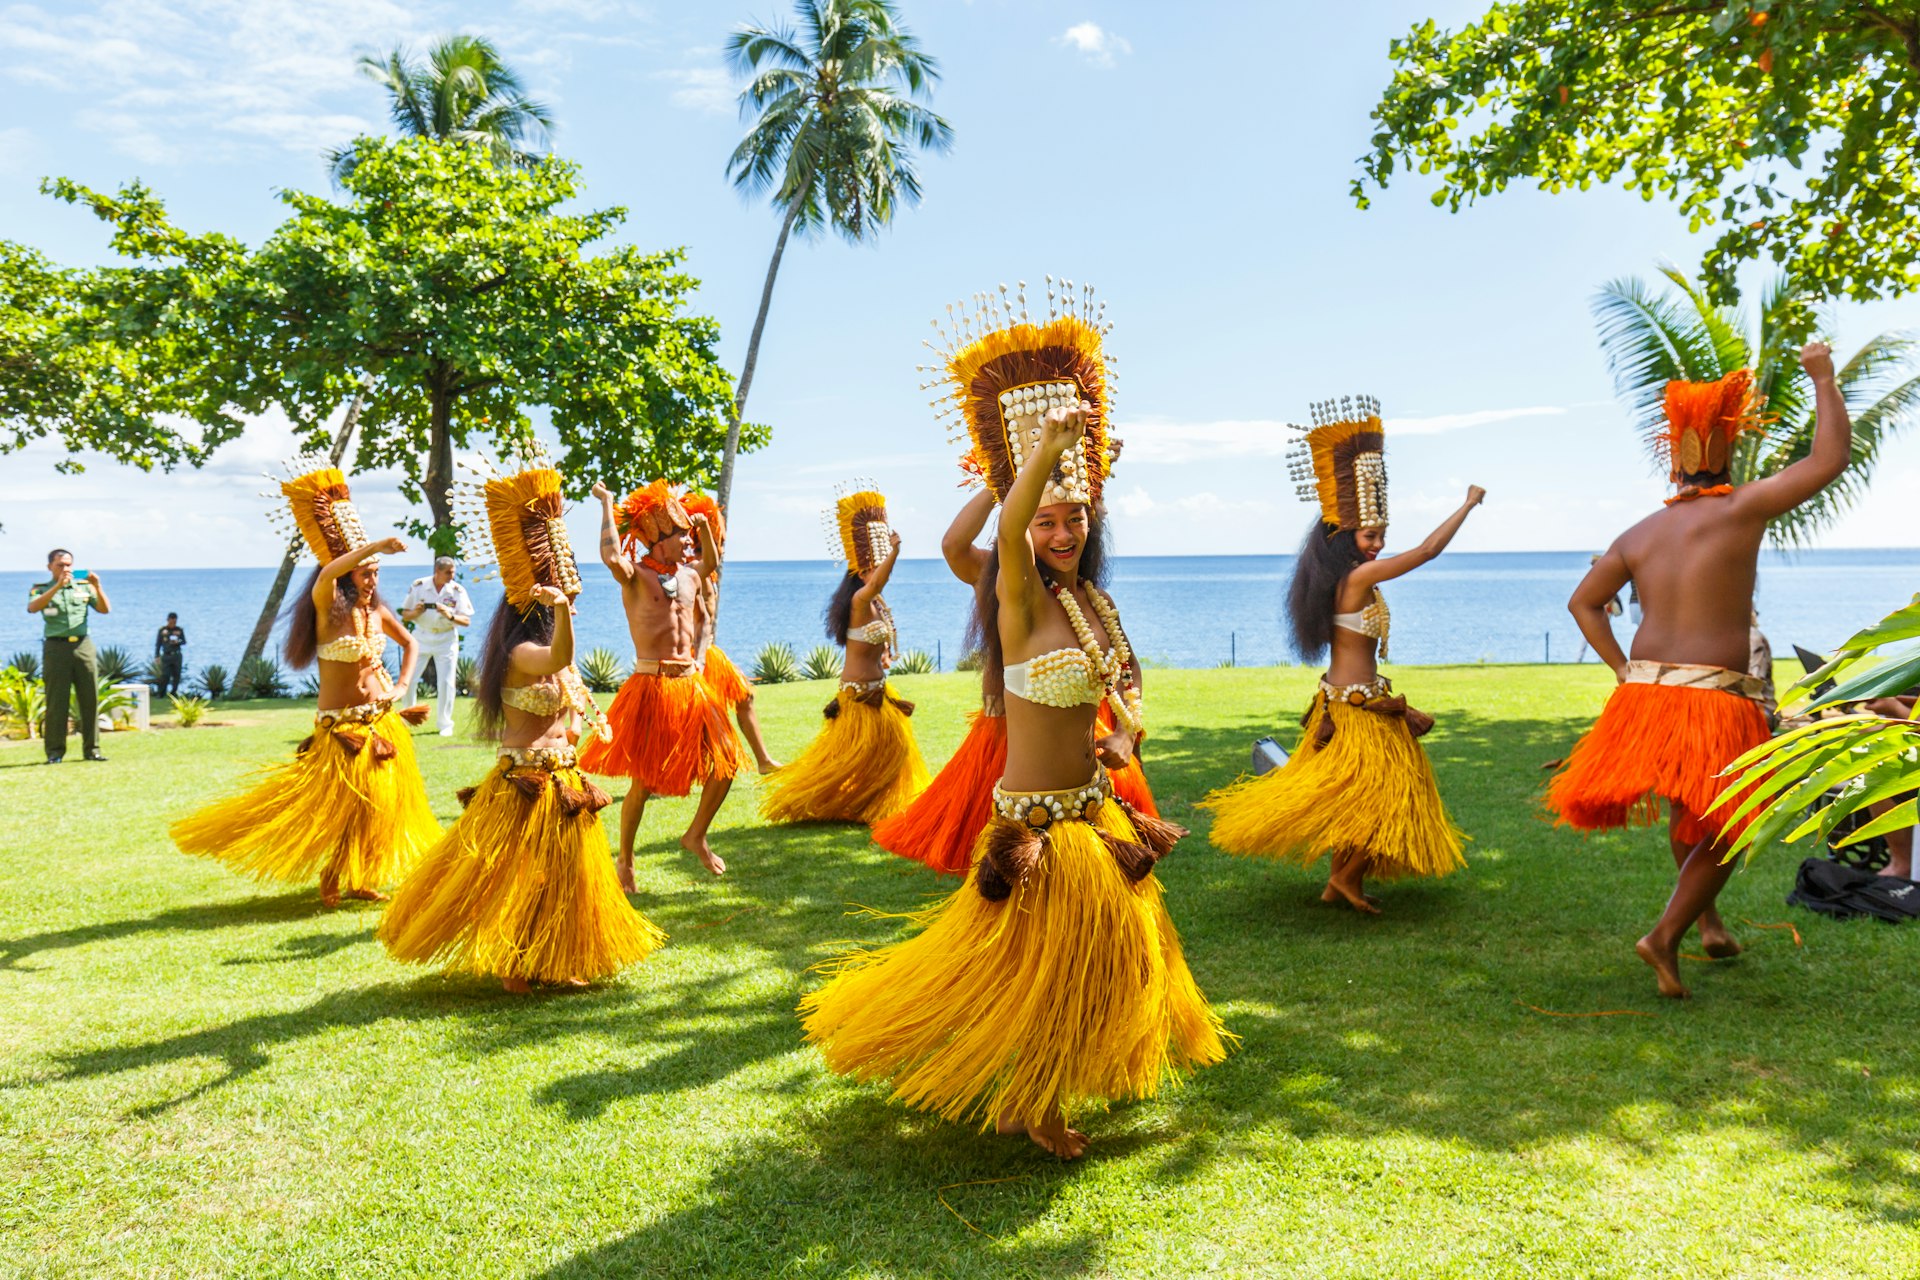 Should you visit Fiji or Tahiti? - Lonely Planet